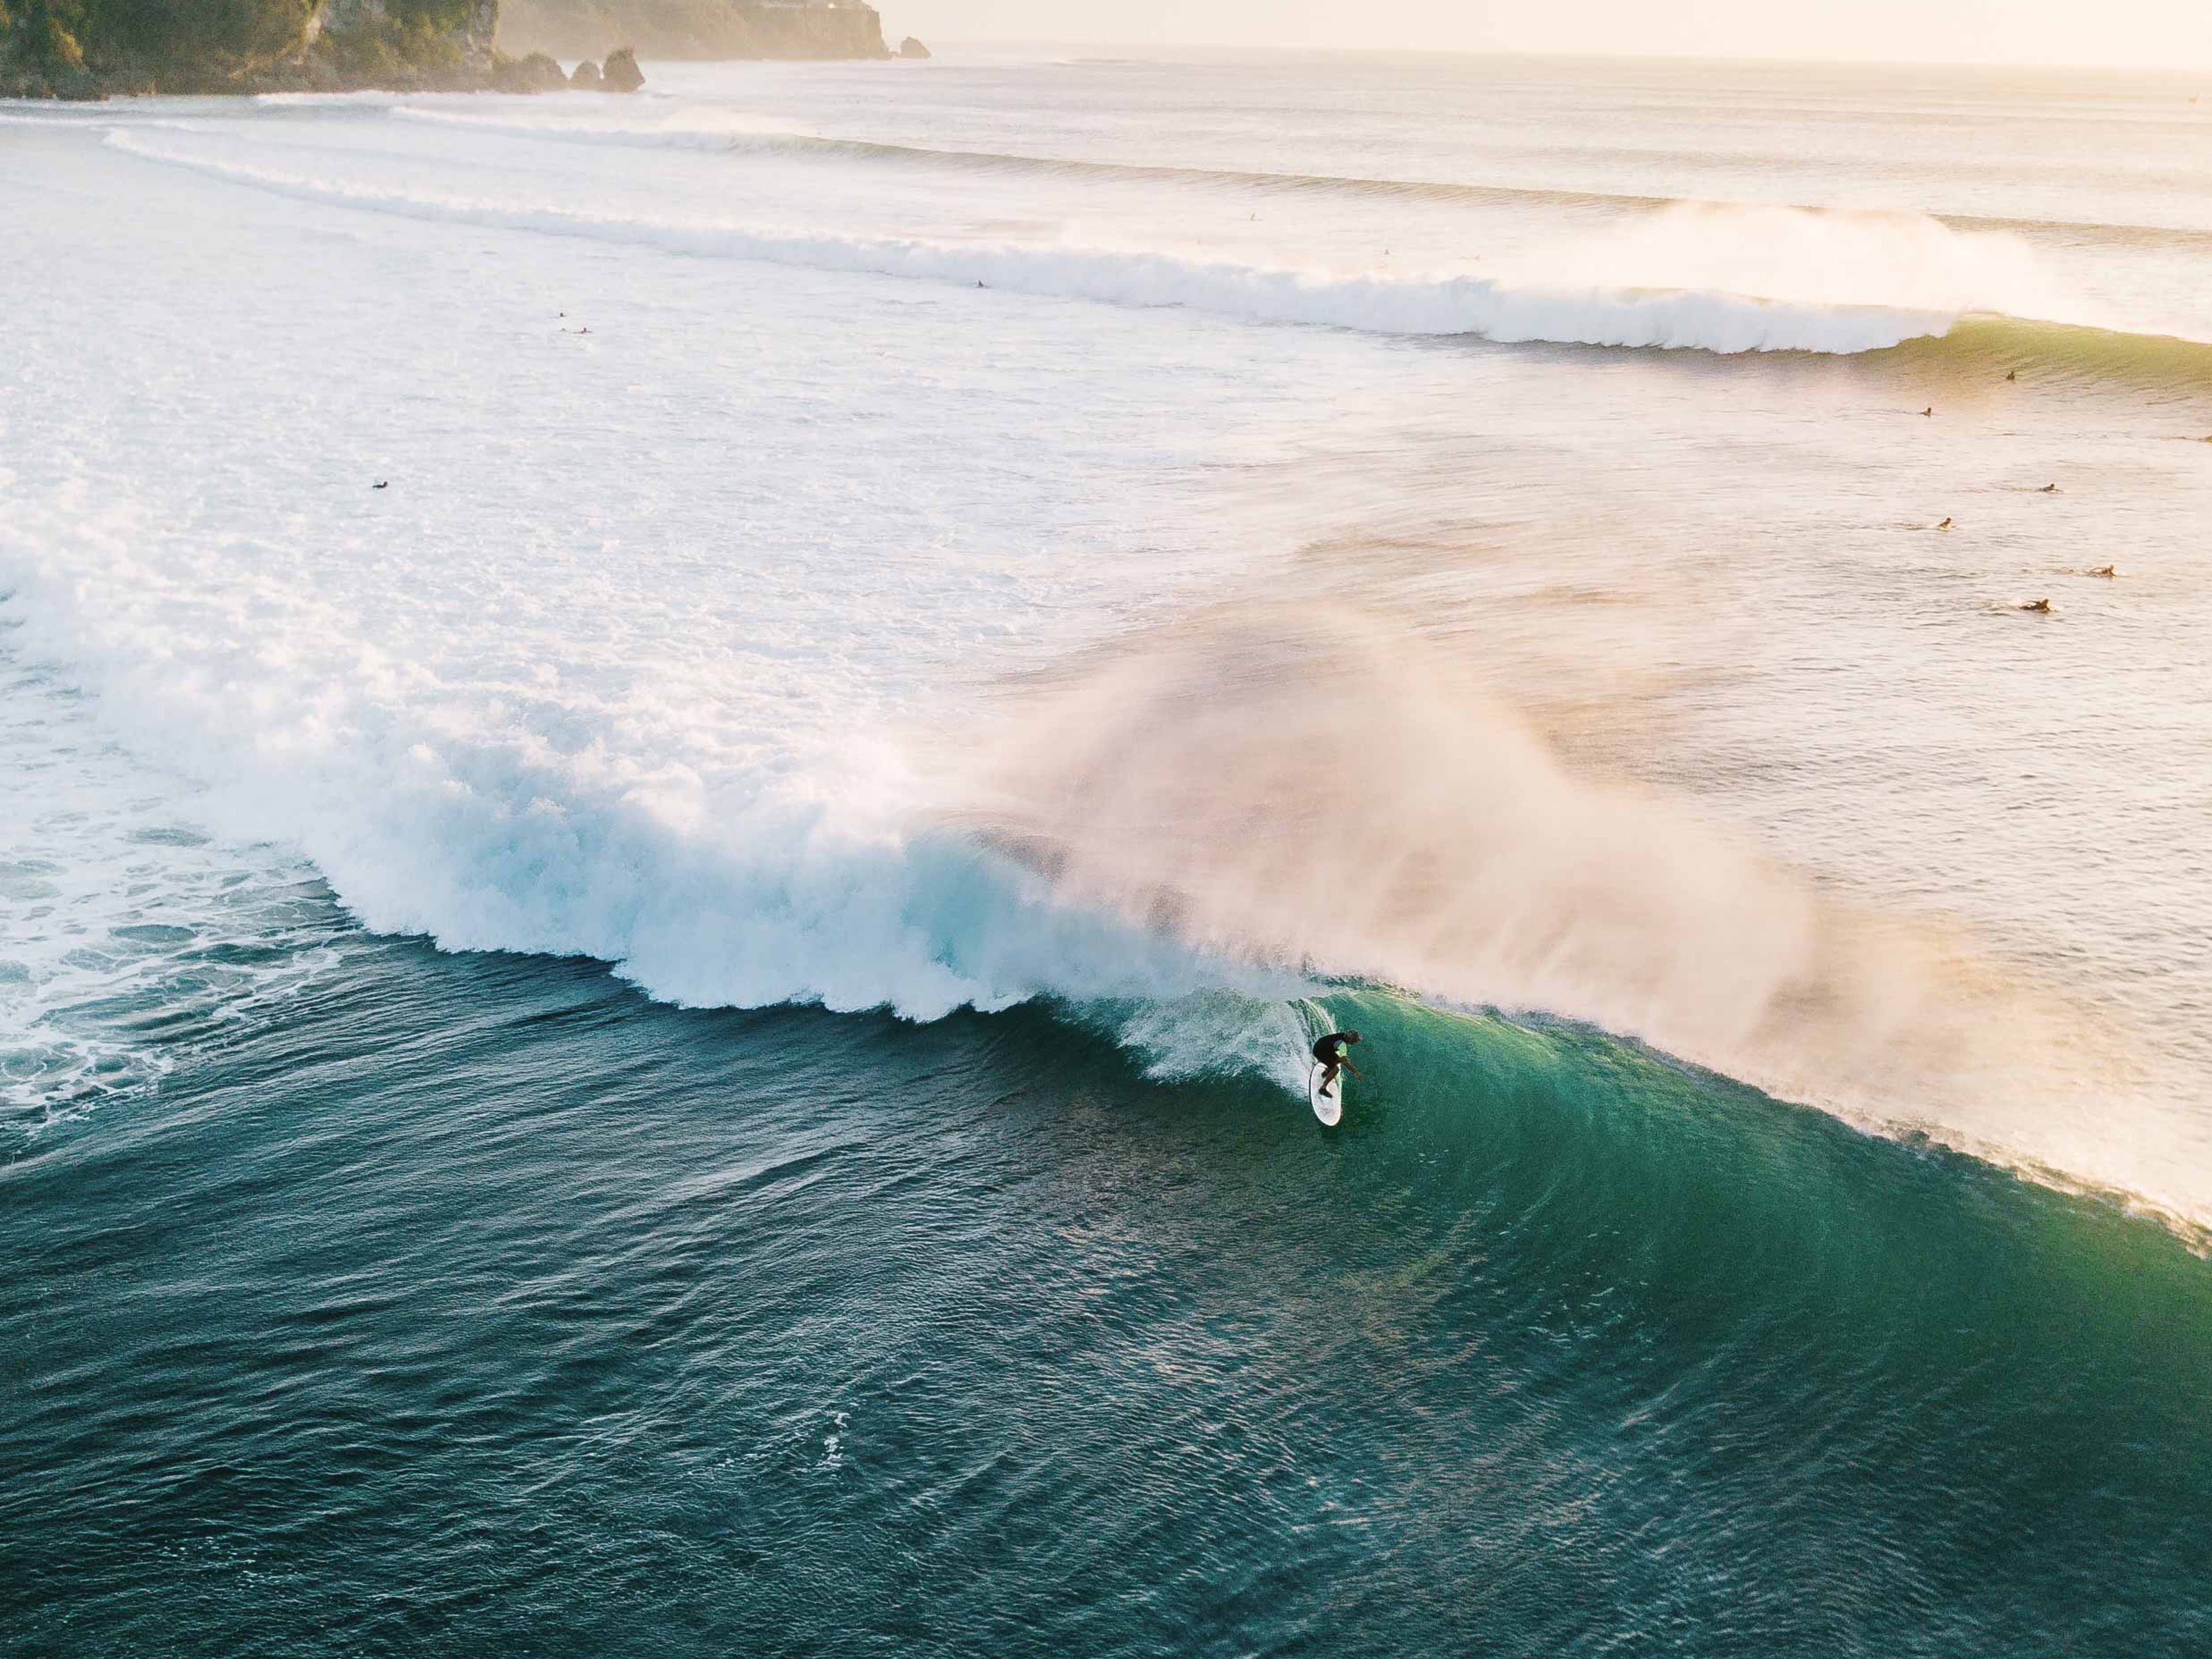 An aerial view of a surfer at the end of a rolling wave.